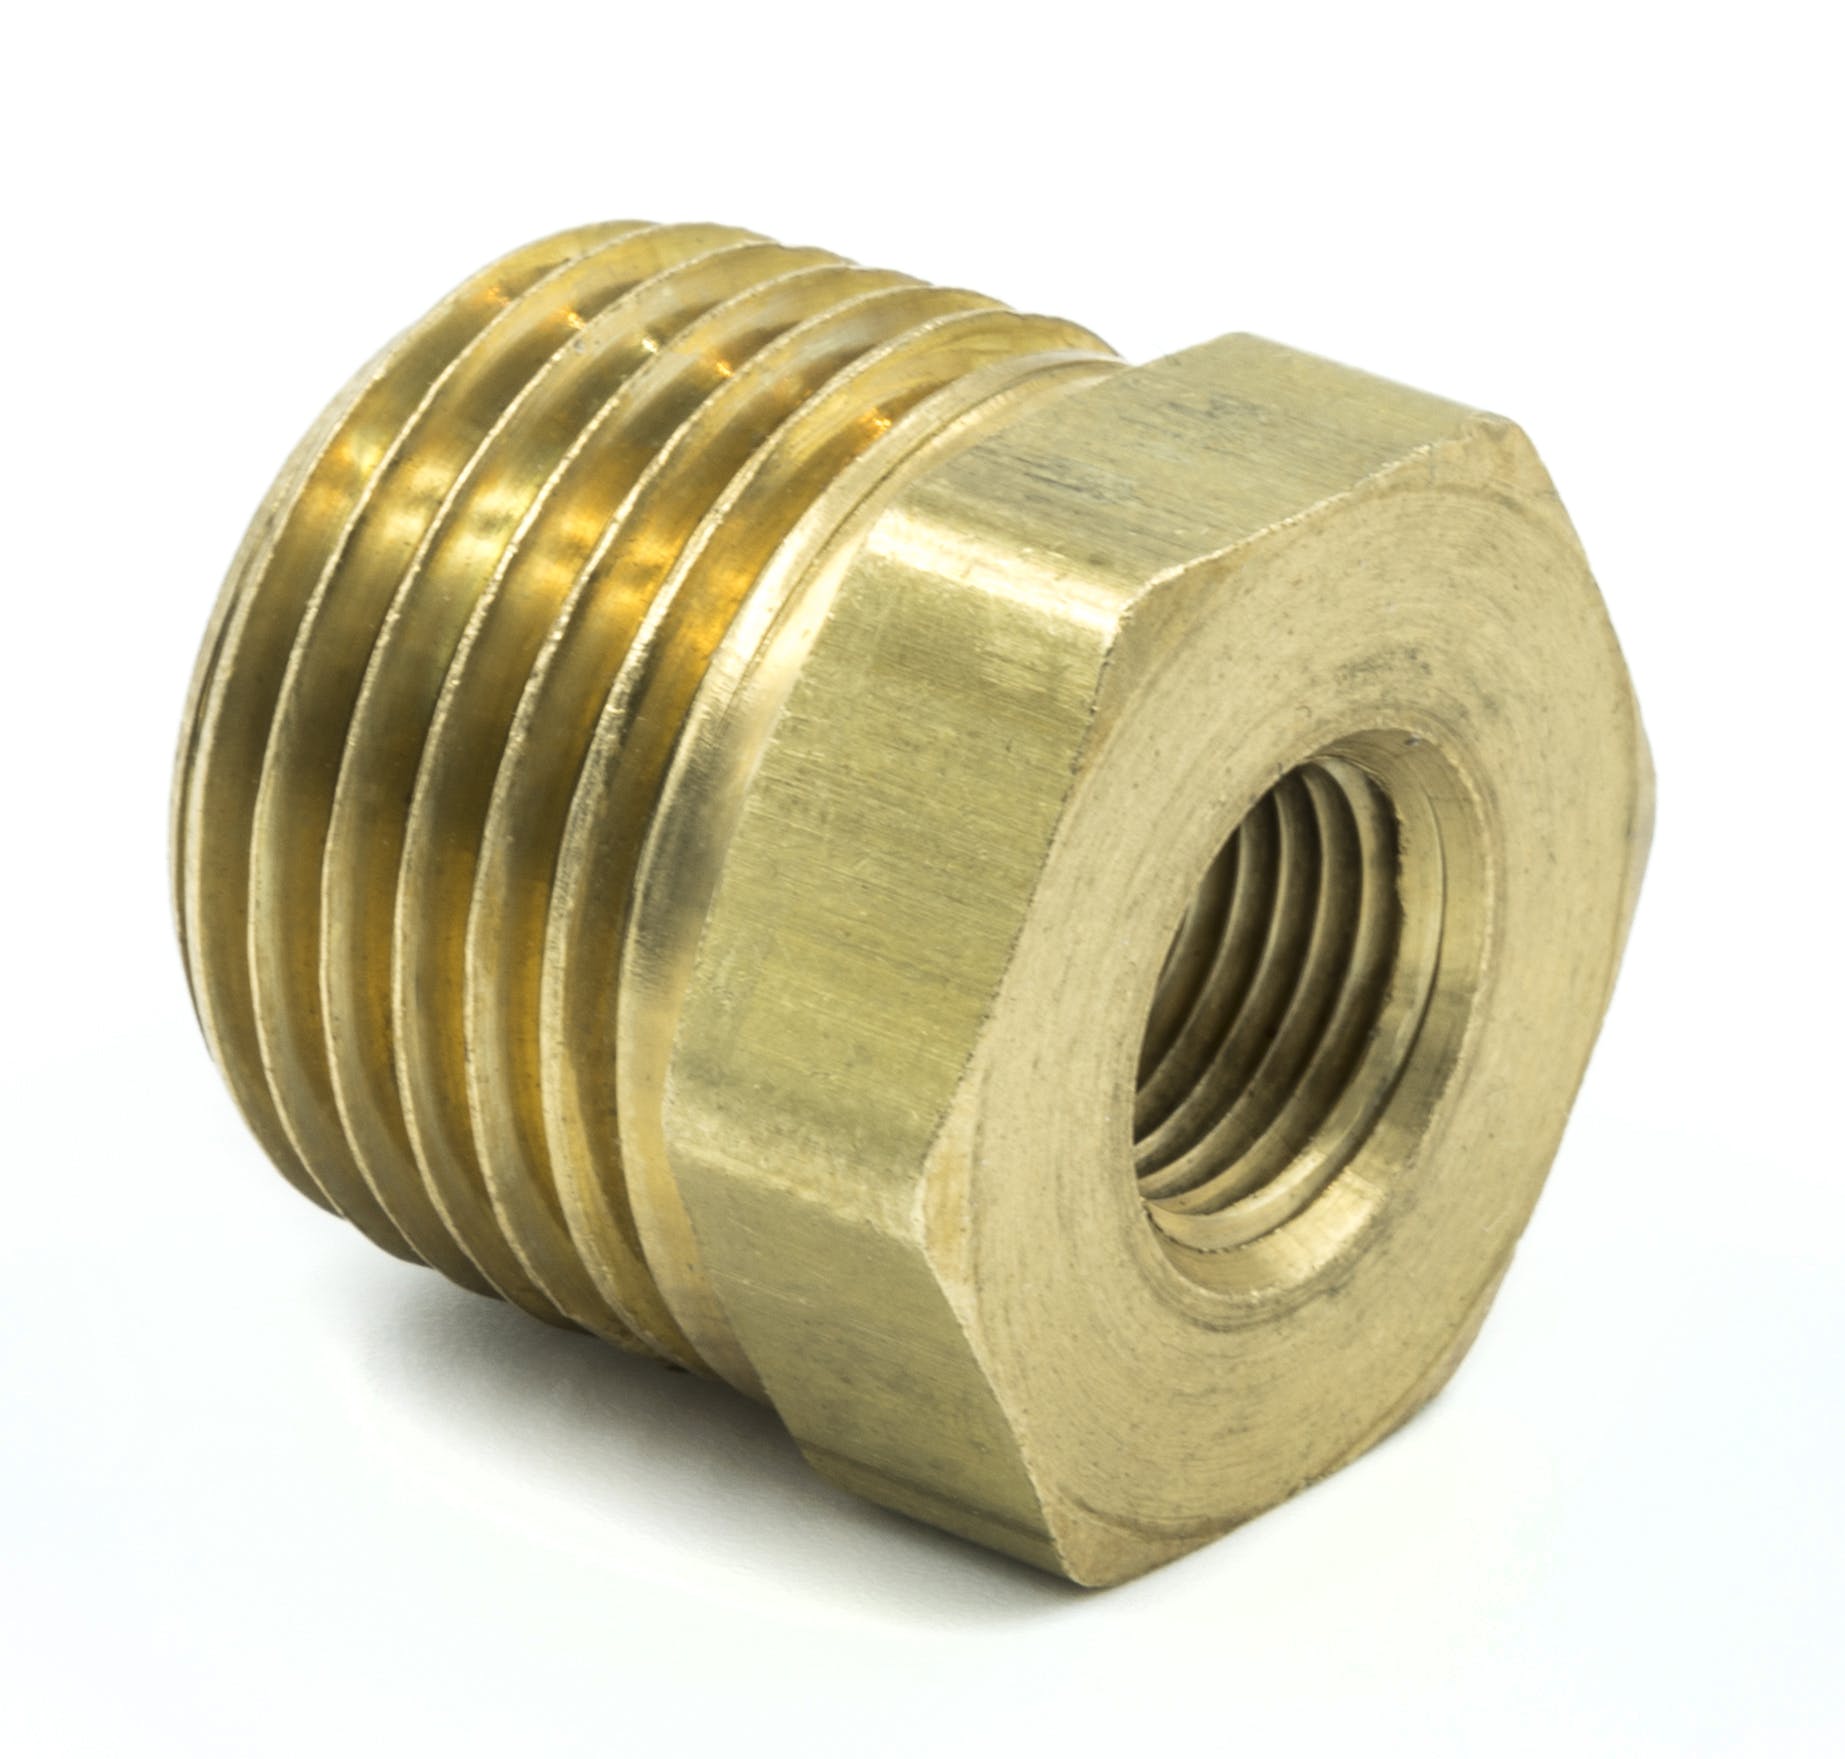 AutoMeter Products 2285 Adapter Fitting, 1/2 NPT Male, 1/8 NPT Female, Brass